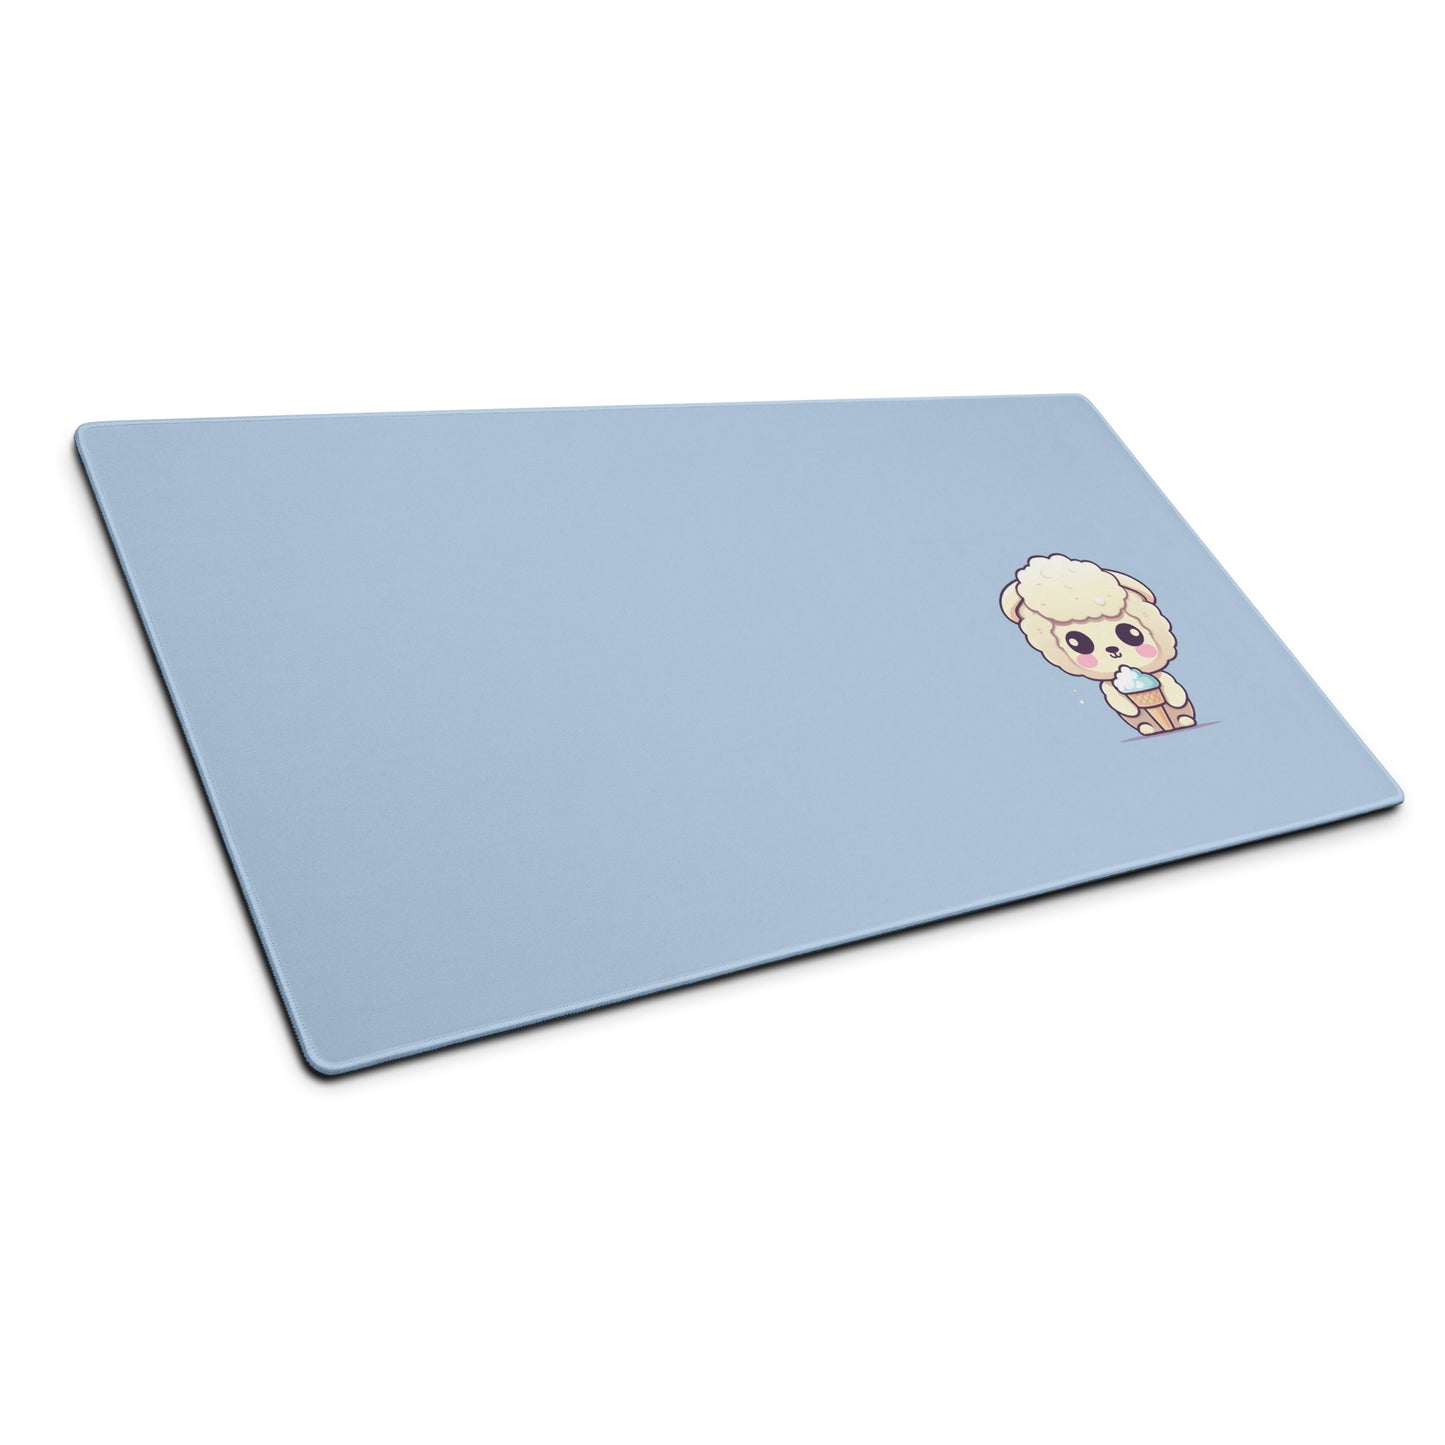 A 36" x 18" desk pad with a cute sheep eating ice cream on it shown at an angle. Blue in color.